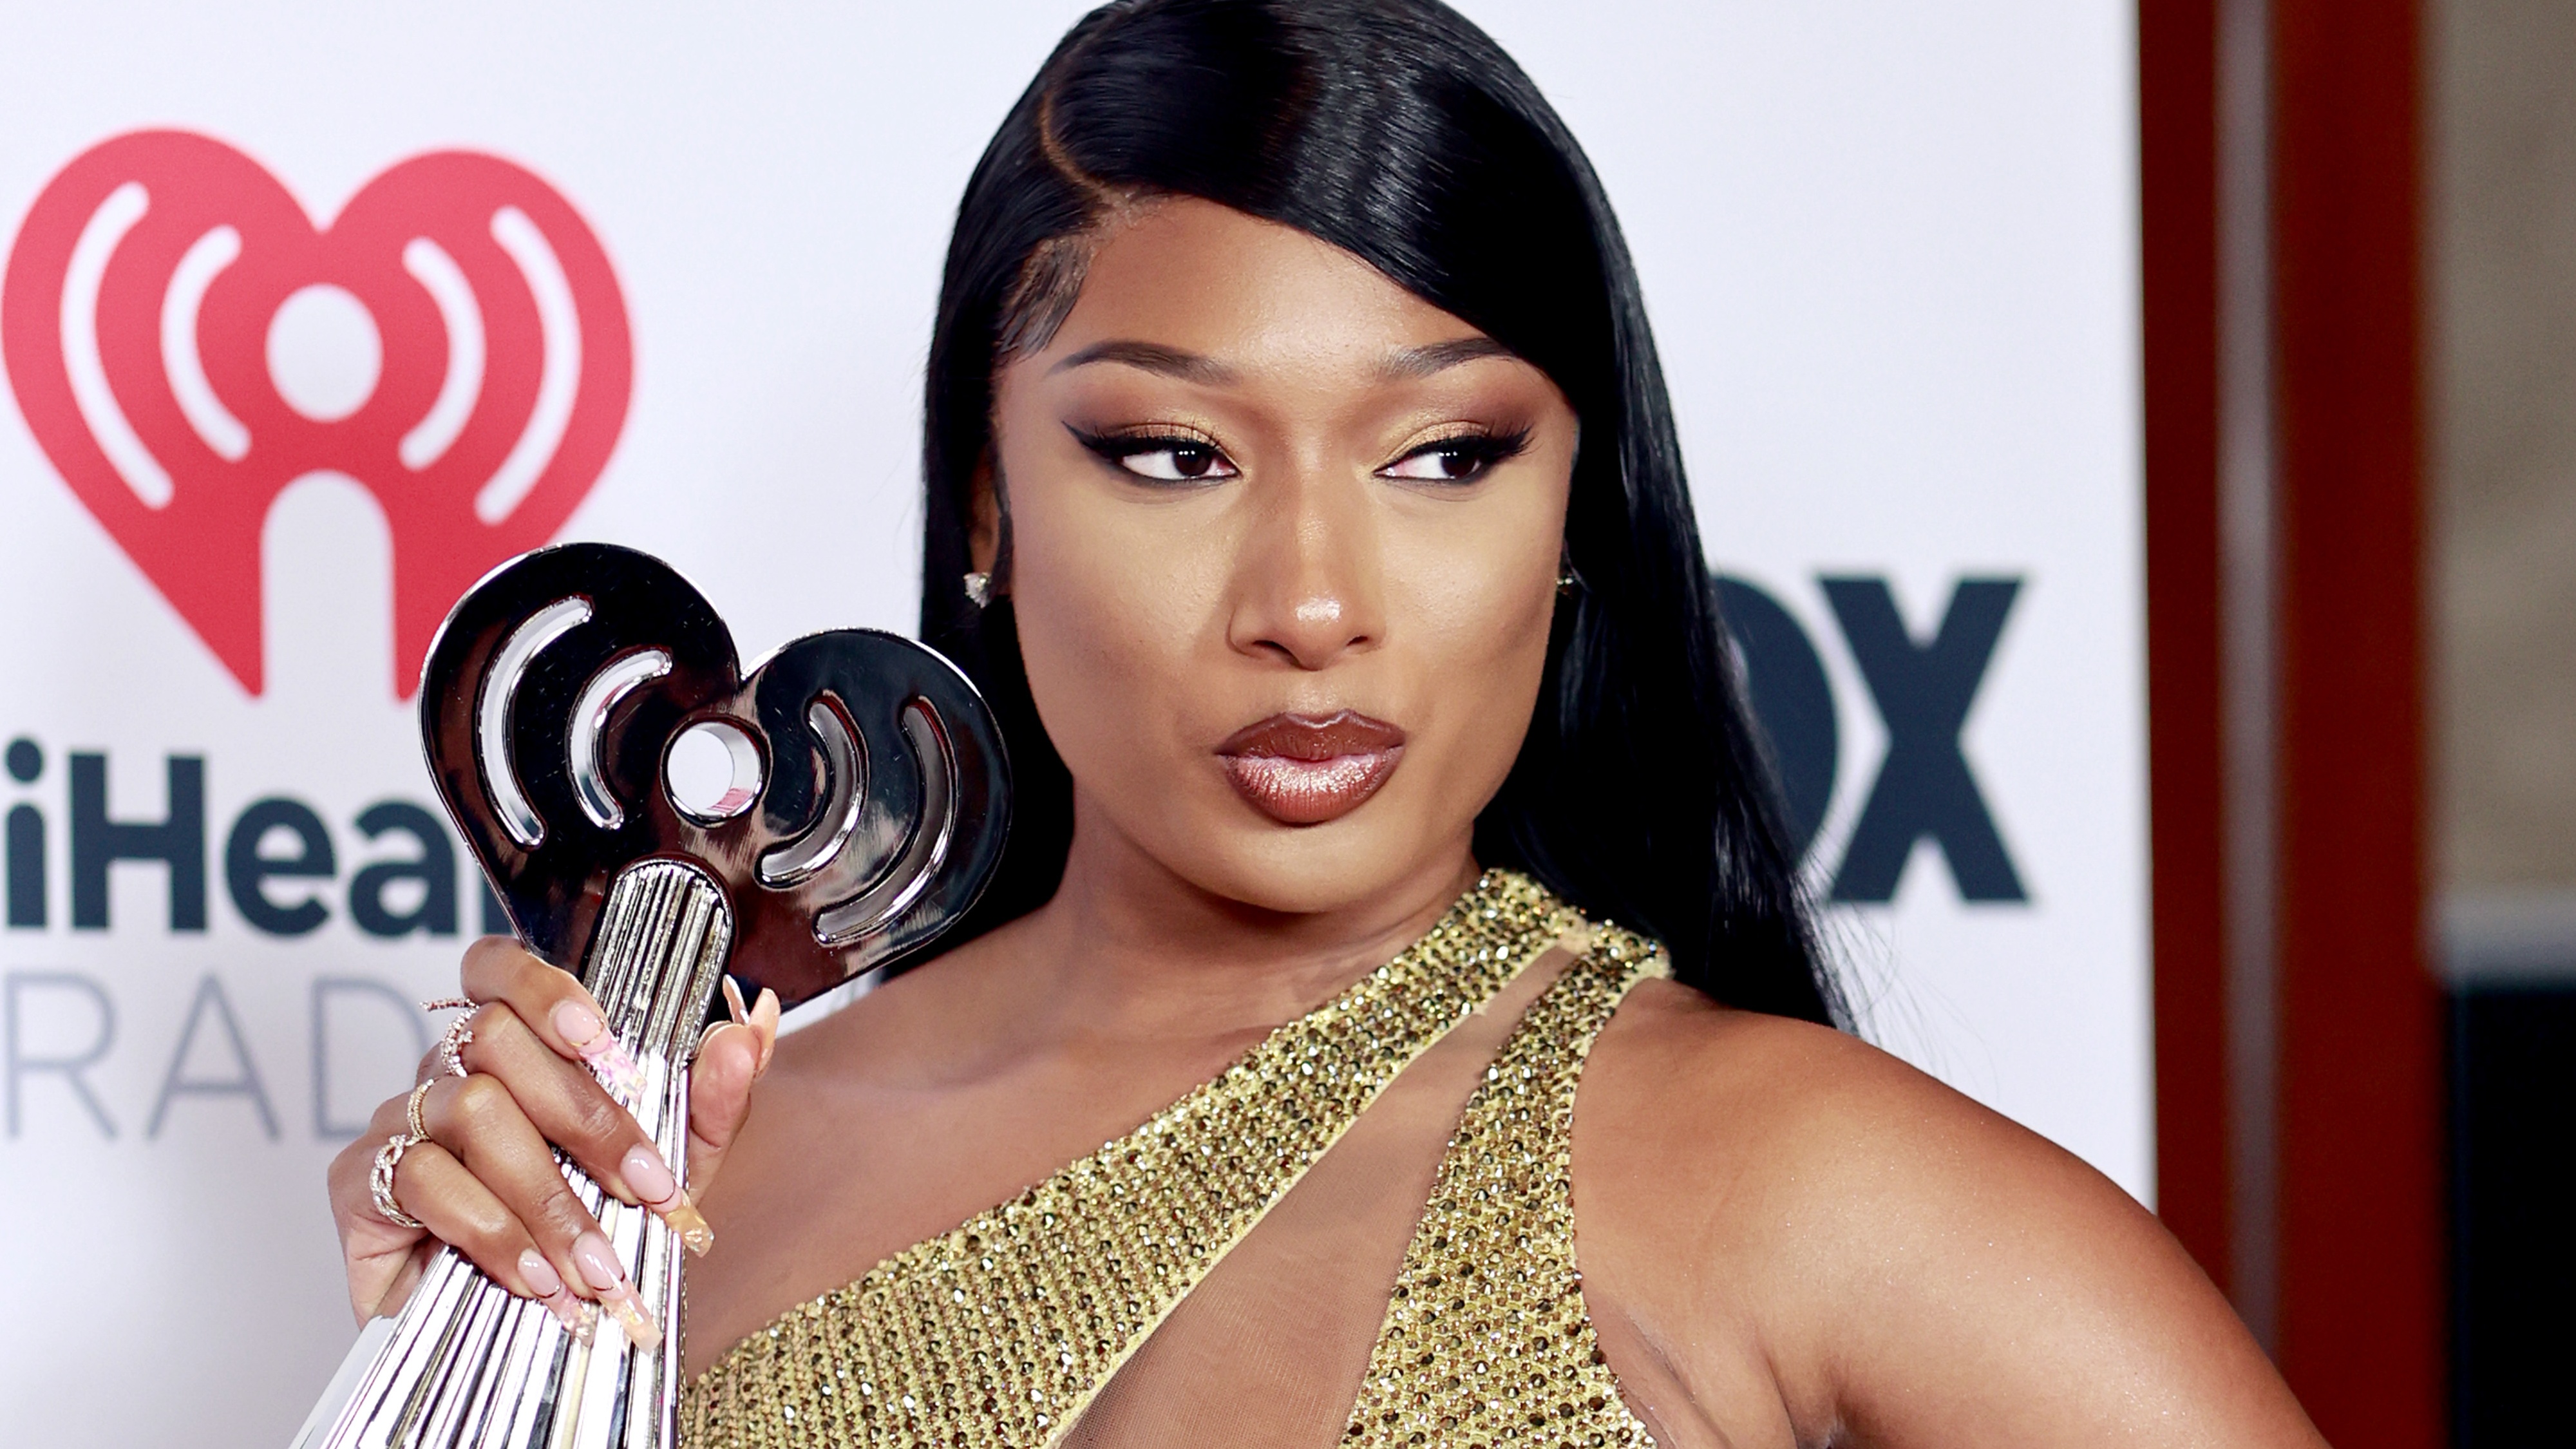 Watch Megan Thee Stallion’s Cameraman Hilariously Attempt To Keep Up With A Twerking Dancer